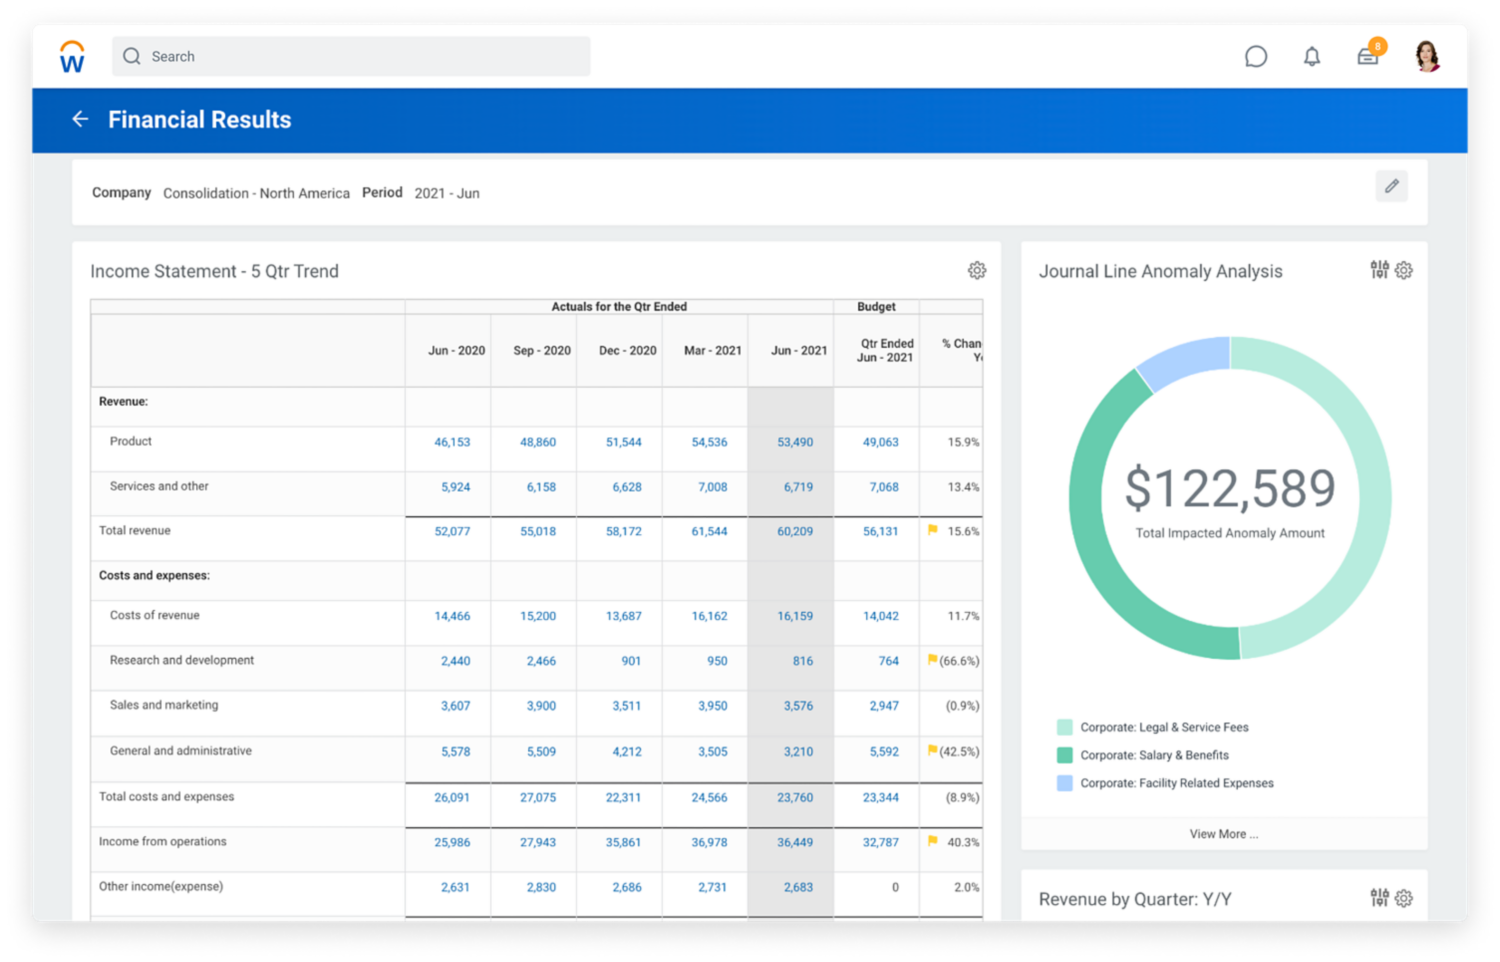 Financial accounting results dashboard showing income statement and quarterly expense analysis.